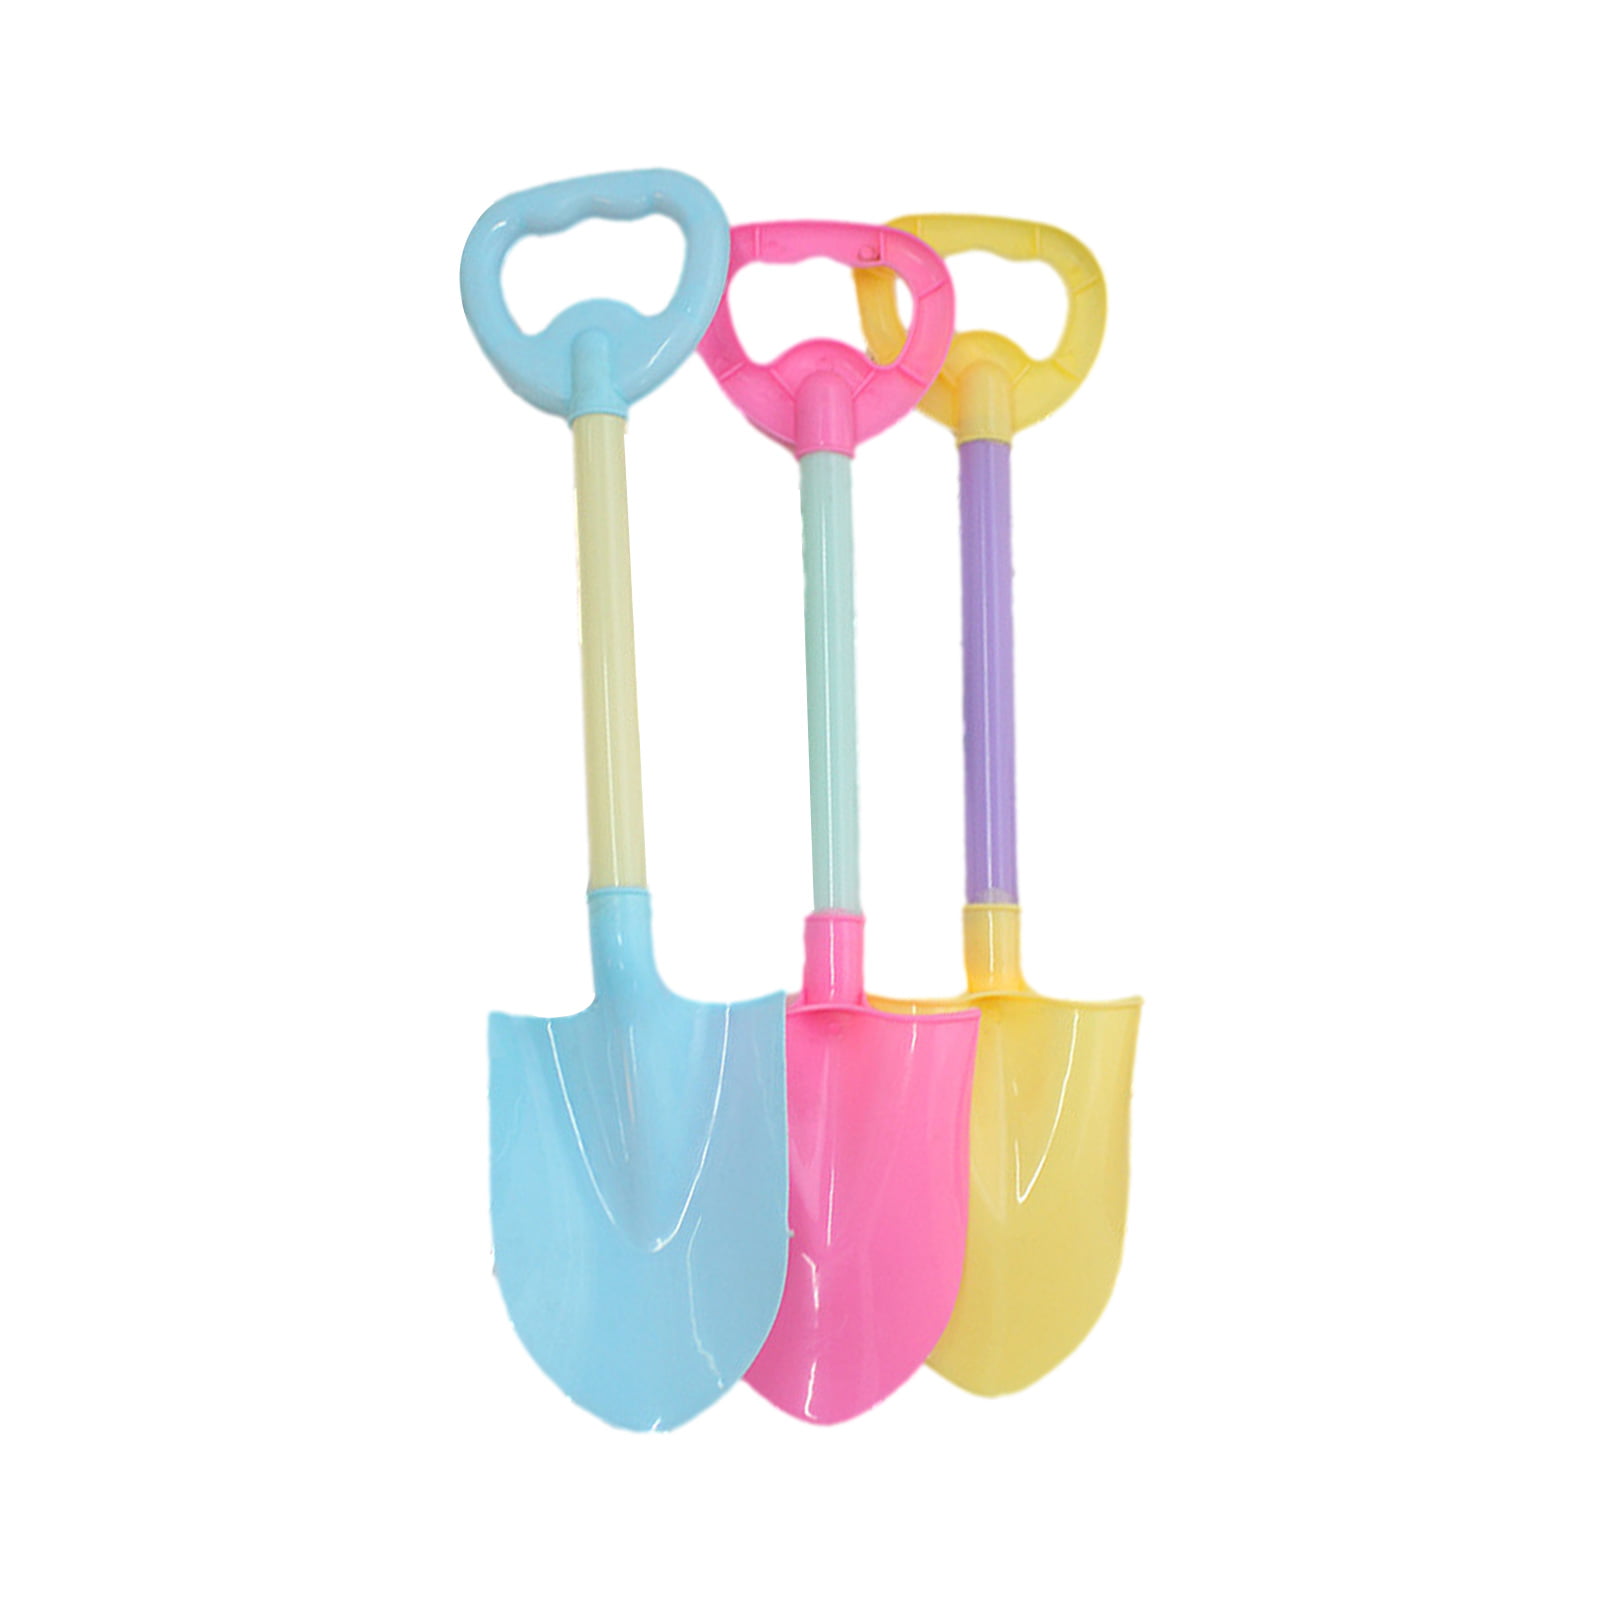 Plastic Sand and Garden Digging Spade